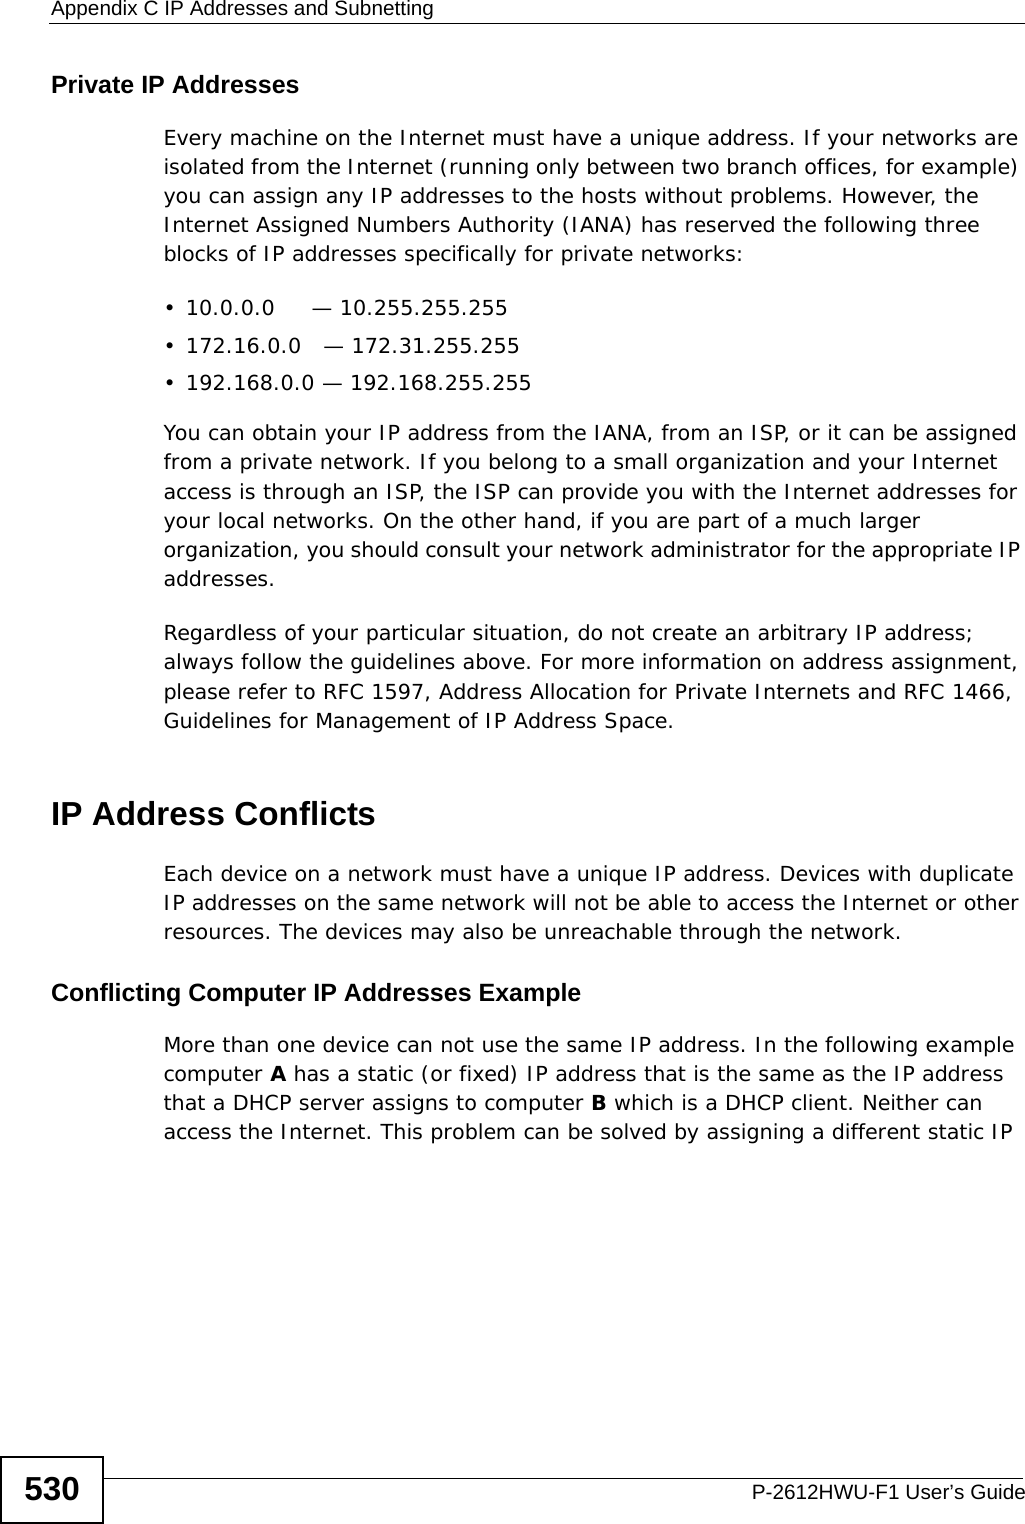 Appendix C IP Addresses and SubnettingP-2612HWU-F1 User’s Guide530Private IP AddressesEvery machine on the Internet must have a unique address. If your networks are isolated from the Internet (running only between two branch offices, for example) you can assign any IP addresses to the hosts without problems. However, the Internet Assigned Numbers Authority (IANA) has reserved the following three blocks of IP addresses specifically for private networks:• 10.0.0.0     — 10.255.255.255• 172.16.0.0   — 172.31.255.255• 192.168.0.0 — 192.168.255.255You can obtain your IP address from the IANA, from an ISP, or it can be assigned from a private network. If you belong to a small organization and your Internet access is through an ISP, the ISP can provide you with the Internet addresses for your local networks. On the other hand, if you are part of a much larger organization, you should consult your network administrator for the appropriate IP addresses.Regardless of your particular situation, do not create an arbitrary IP address; always follow the guidelines above. For more information on address assignment, please refer to RFC 1597, Address Allocation for Private Internets and RFC 1466, Guidelines for Management of IP Address Space.IP Address ConflictsEach device on a network must have a unique IP address. Devices with duplicate IP addresses on the same network will not be able to access the Internet or other resources. The devices may also be unreachable through the network. Conflicting Computer IP Addresses ExampleMore than one device can not use the same IP address. In the following example computer A has a static (or fixed) IP address that is the same as the IP address that a DHCP server assigns to computer B which is a DHCP client. Neither can access the Internet. This problem can be solved by assigning a different static IP 